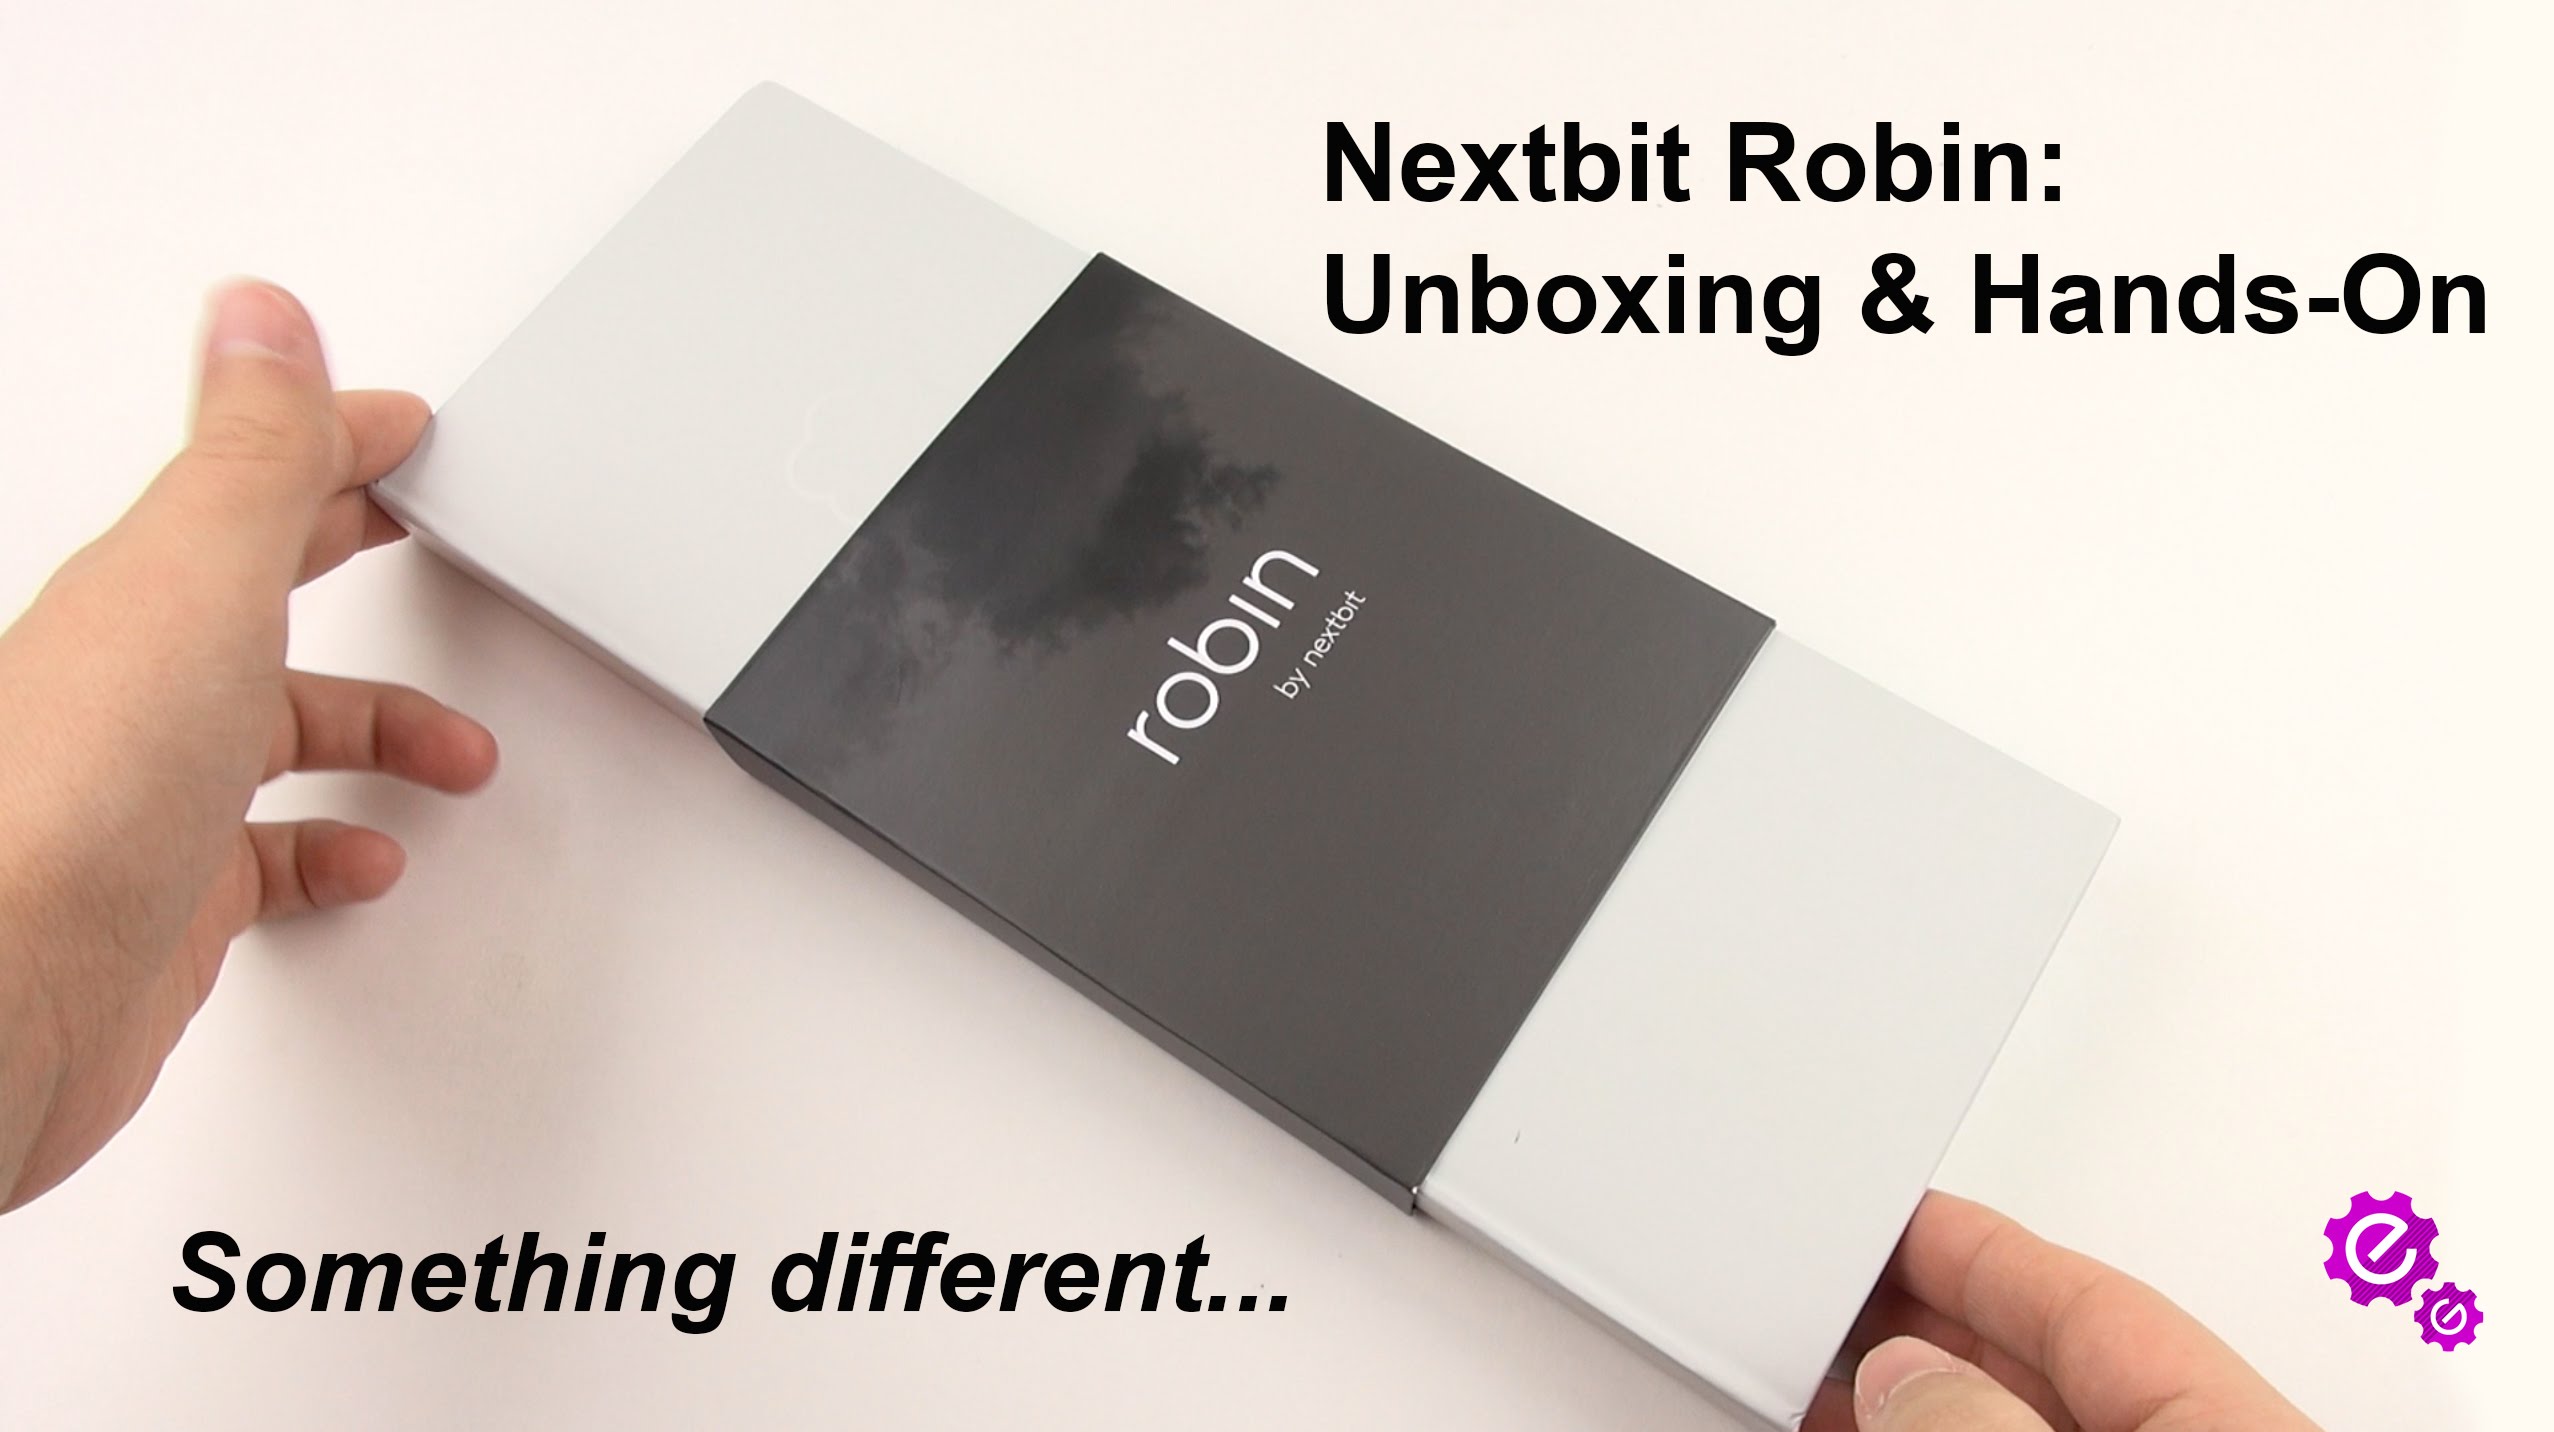 Nextbit Robin: Unboxing & Hands-on